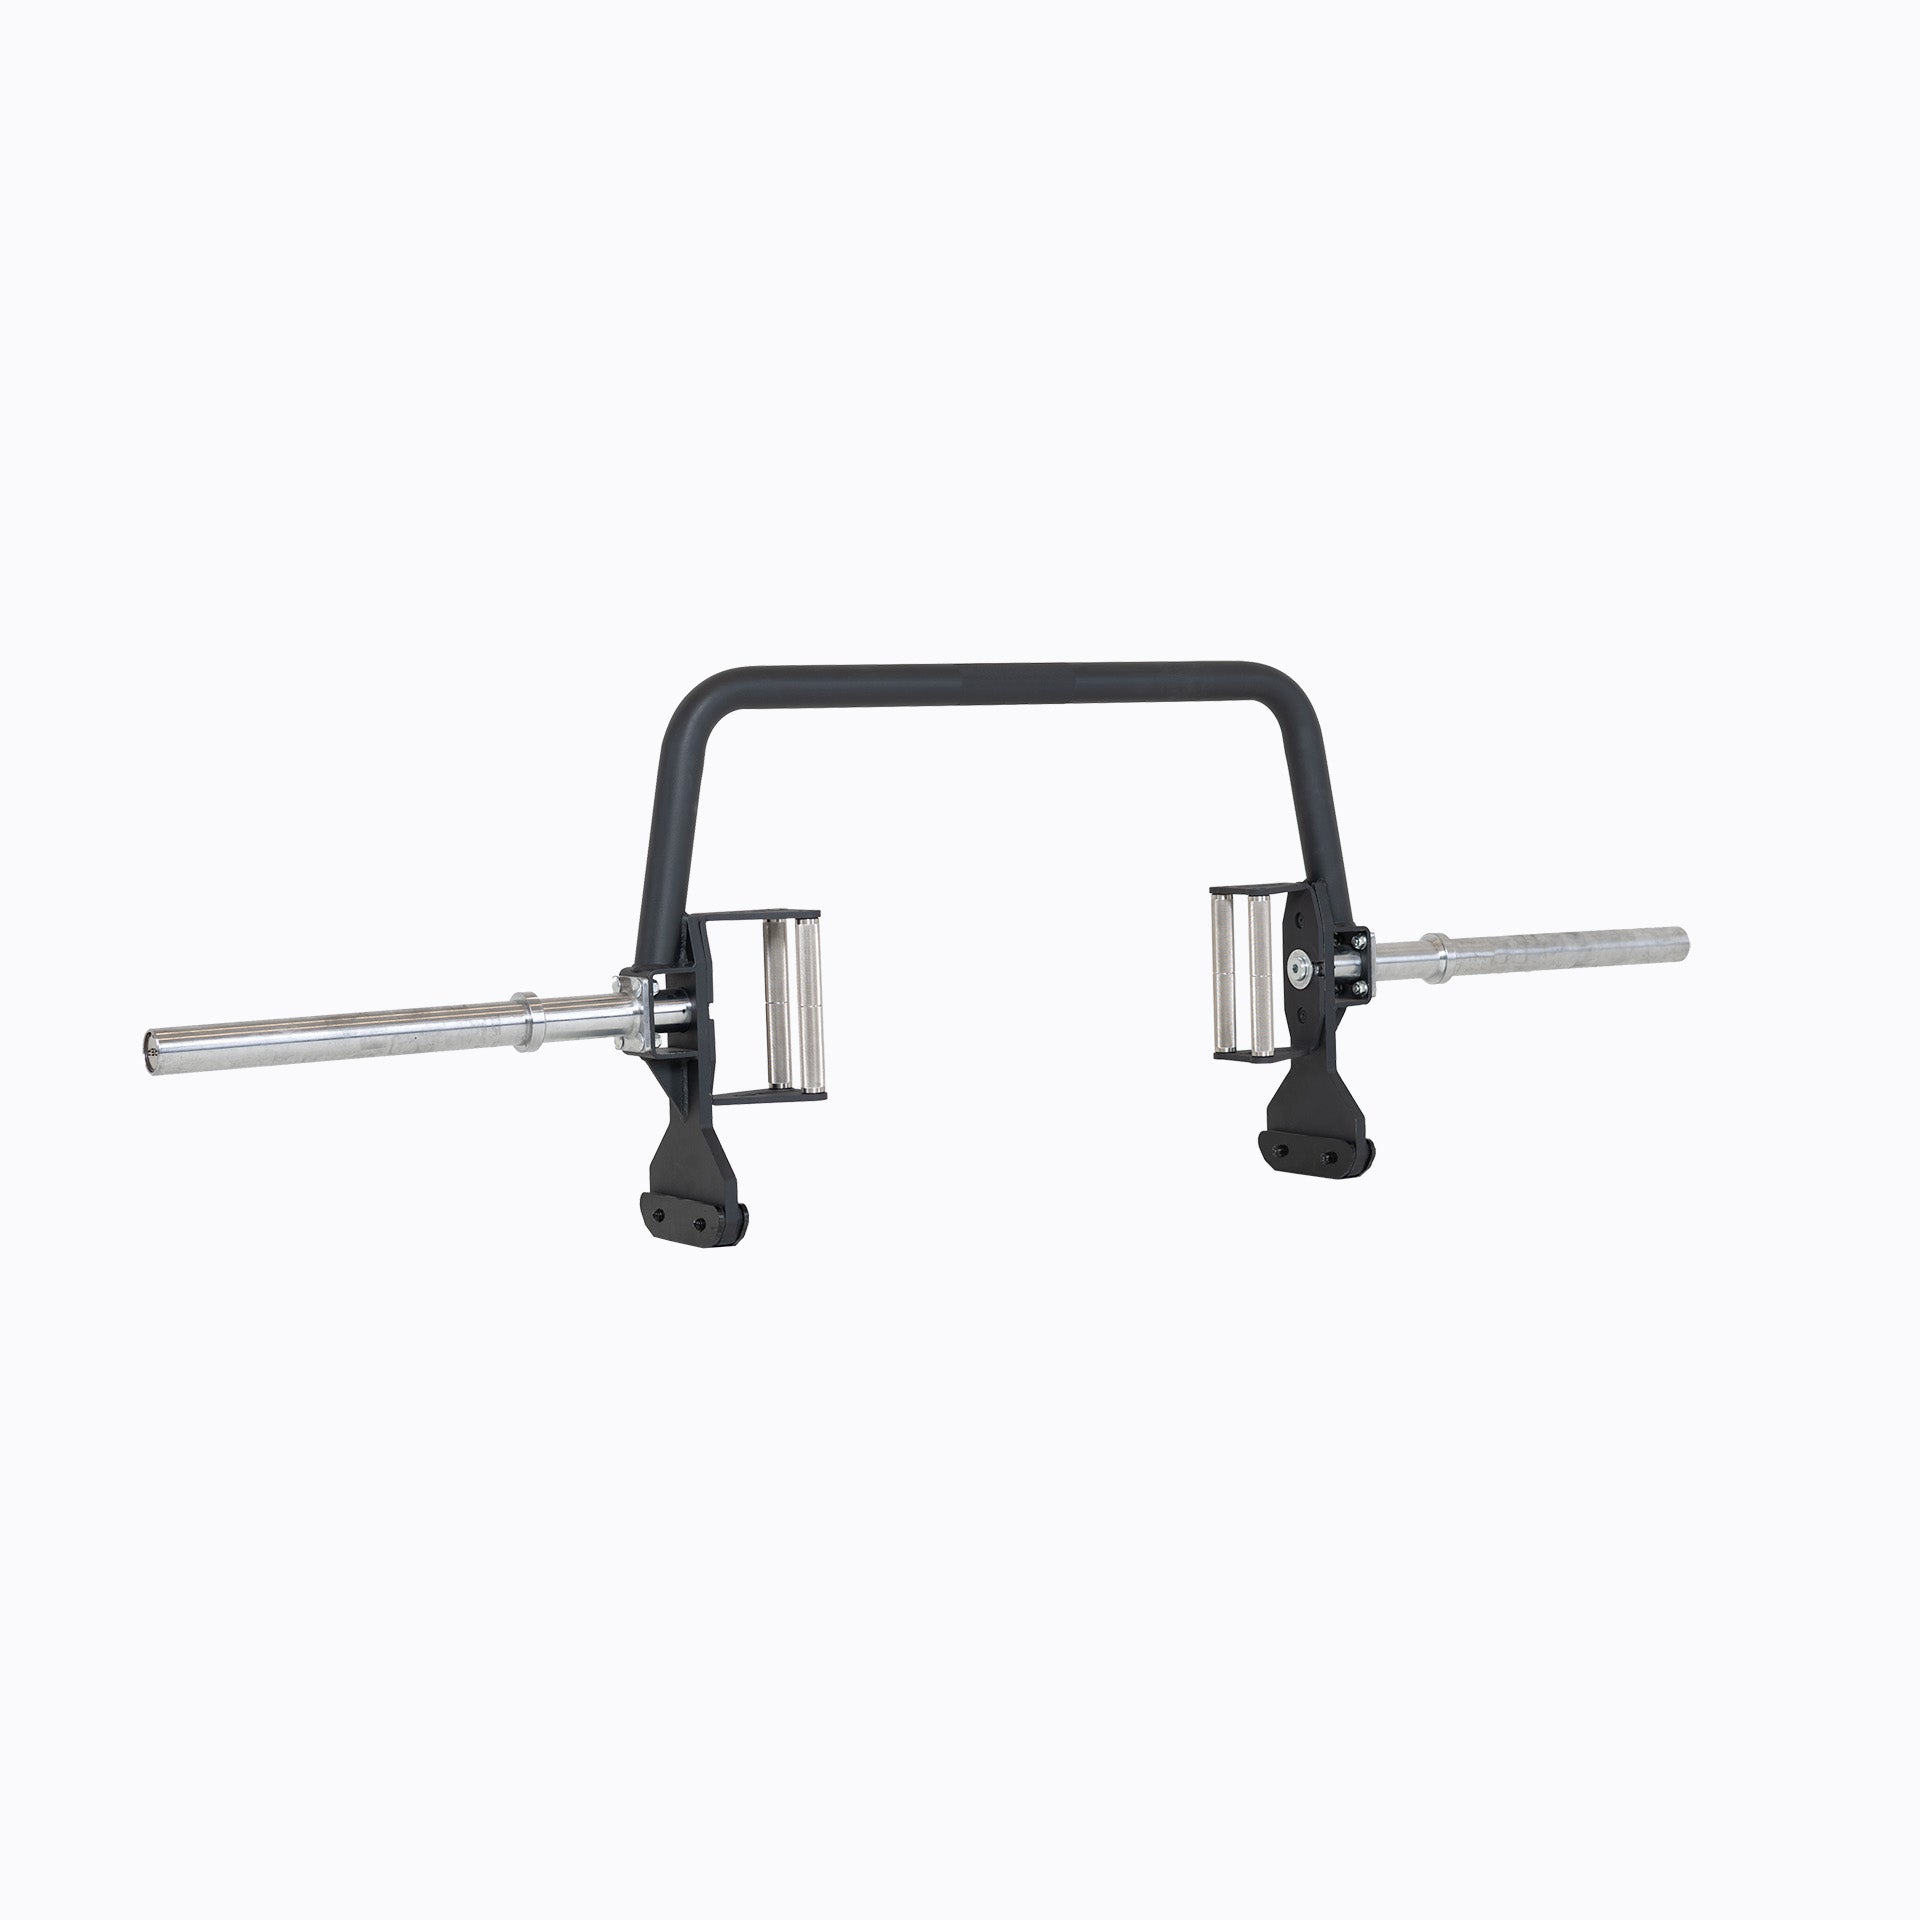 Open Trap Bar with standard handles standing vertically on its integrated deadlift jack.